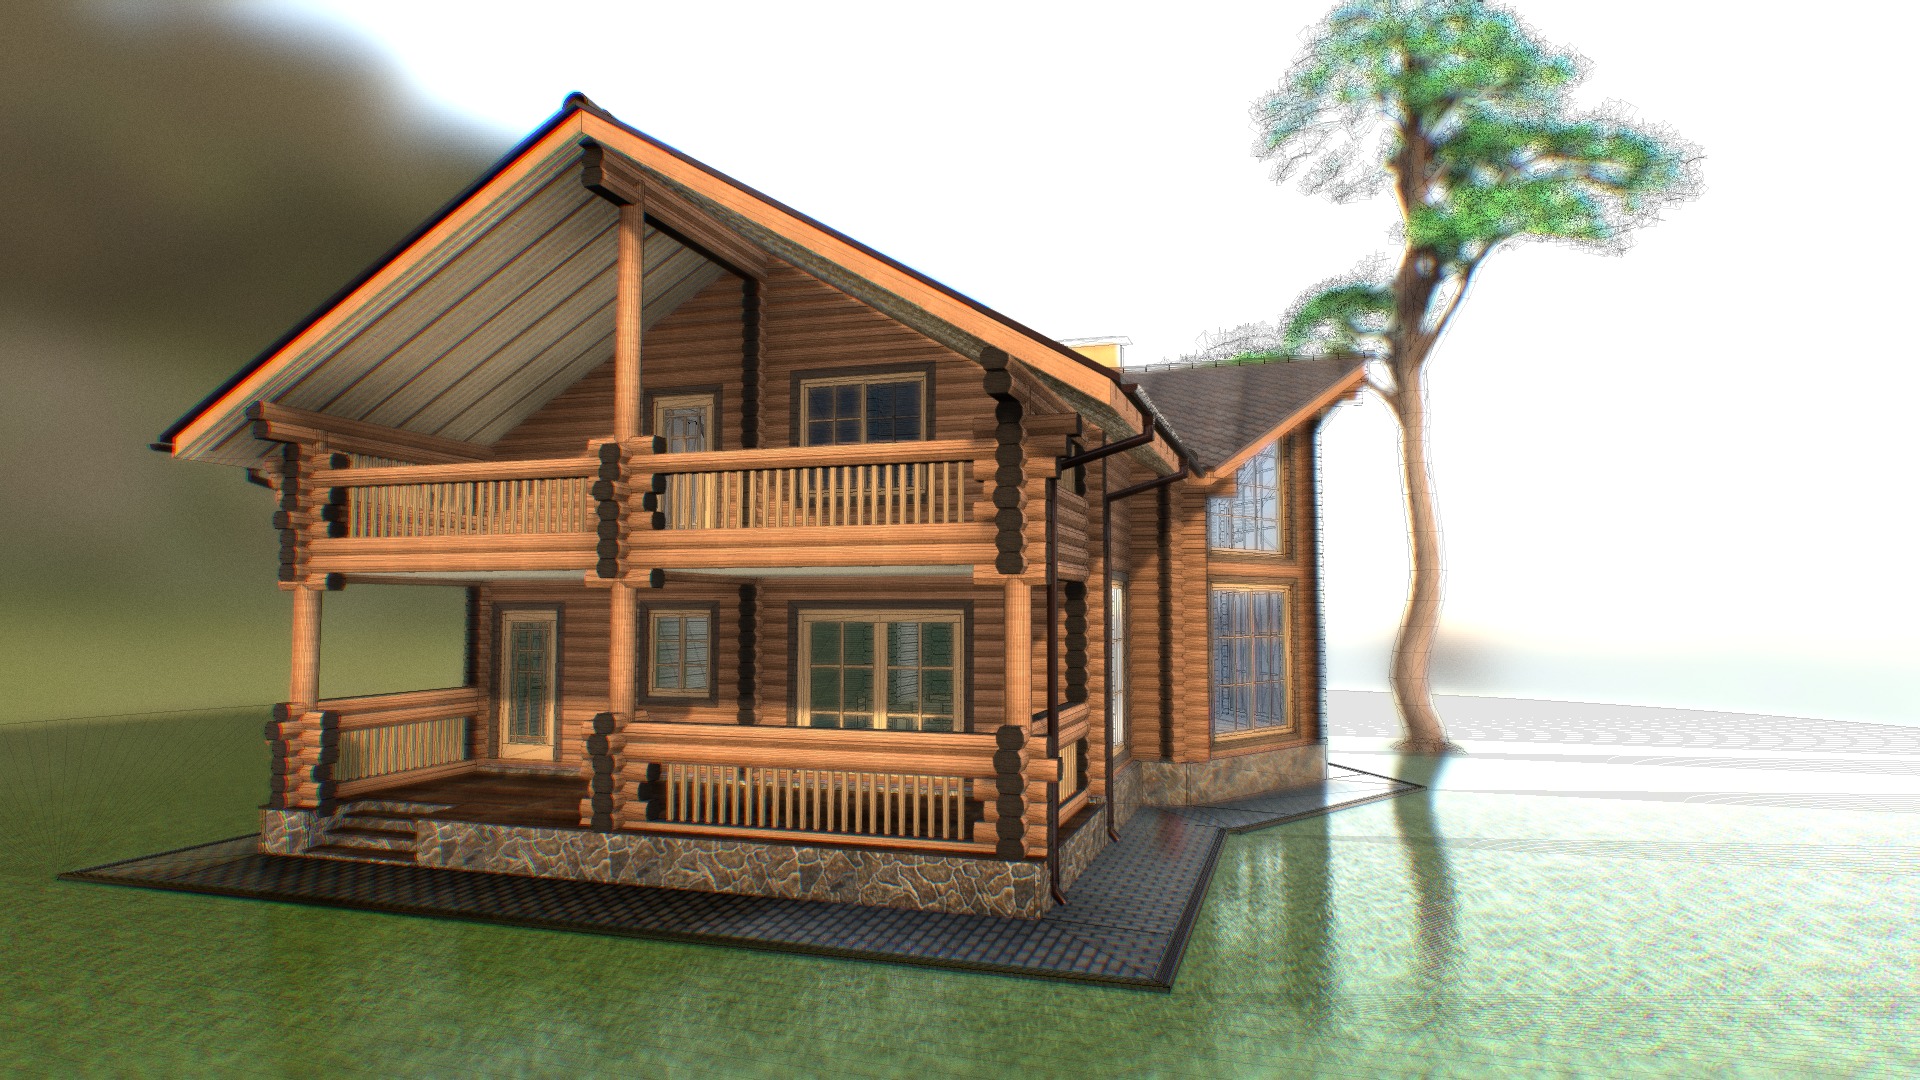 3D model PW-01_06-18 - This is a 3D model of the PW-01_06-18. The 3D model is about a house on a dock.